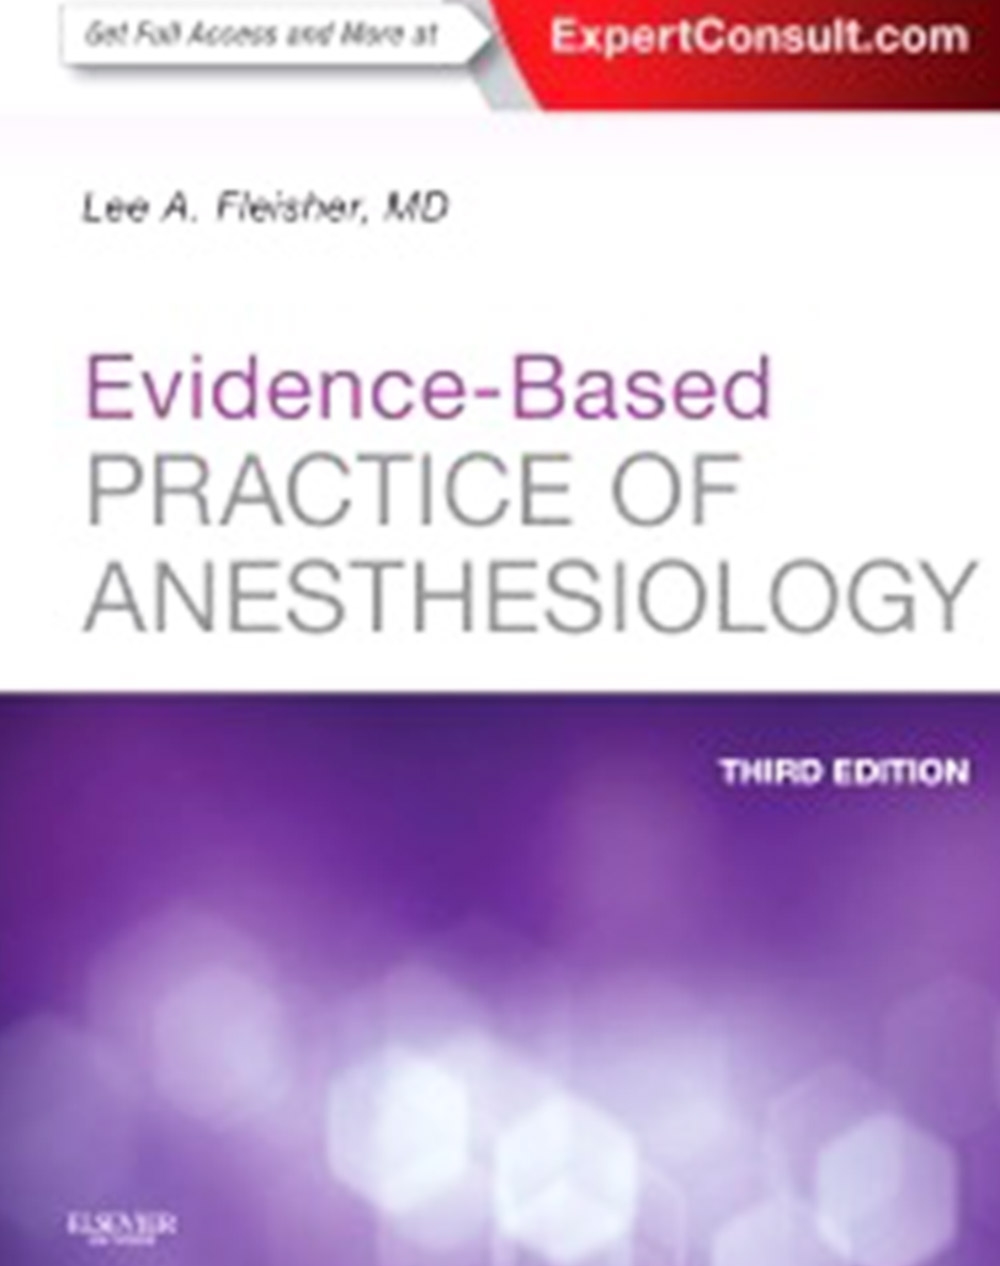 Evidence-Based Practice of Anesthesiology 3/e